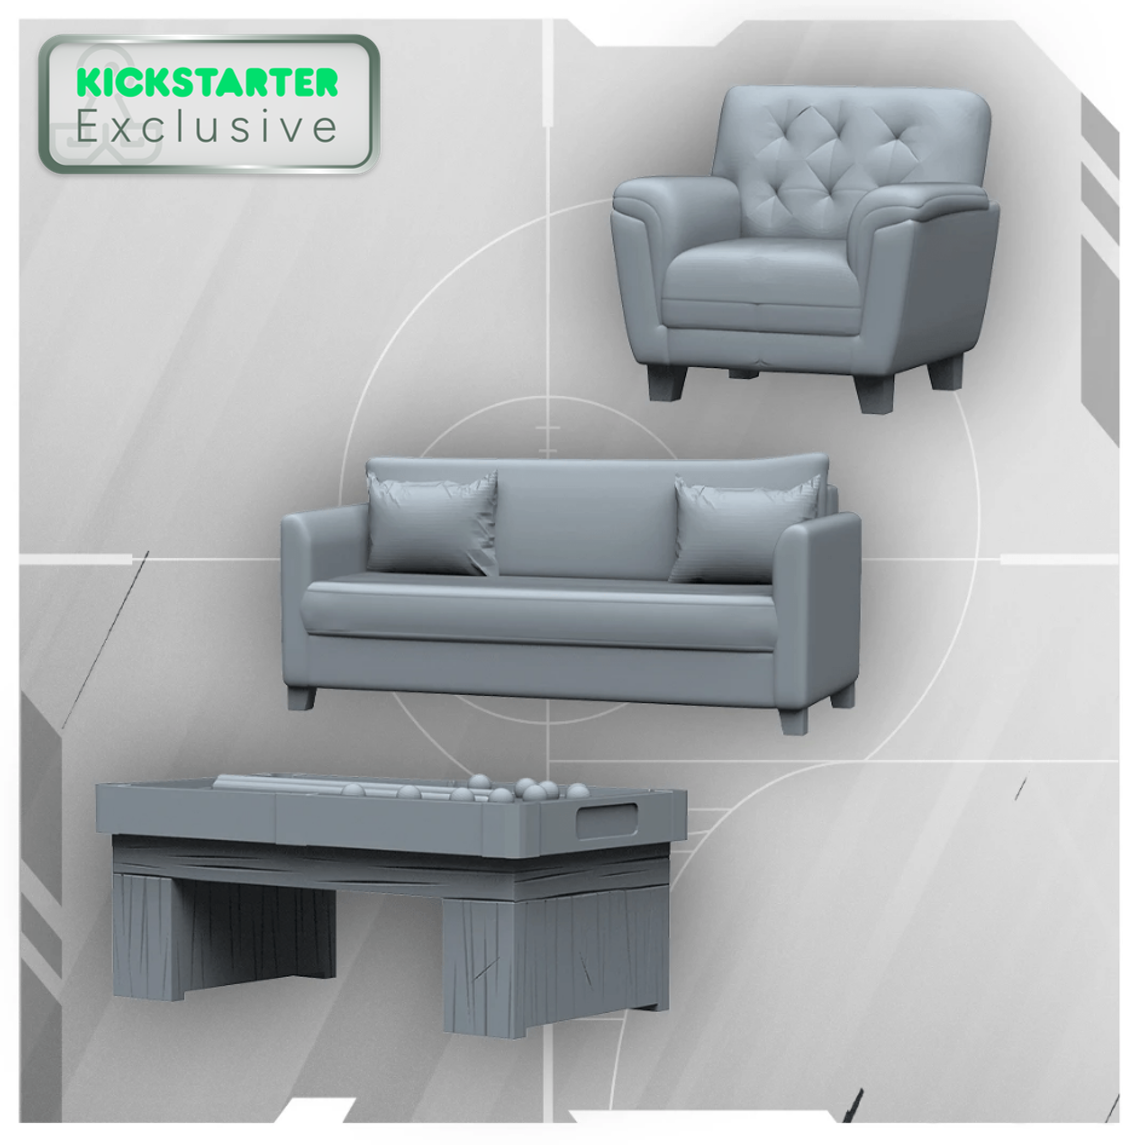 Kickstarter Exclusive 3D Scenery Set from 6: siege the board game, Sofa, Couch, and Pool Table